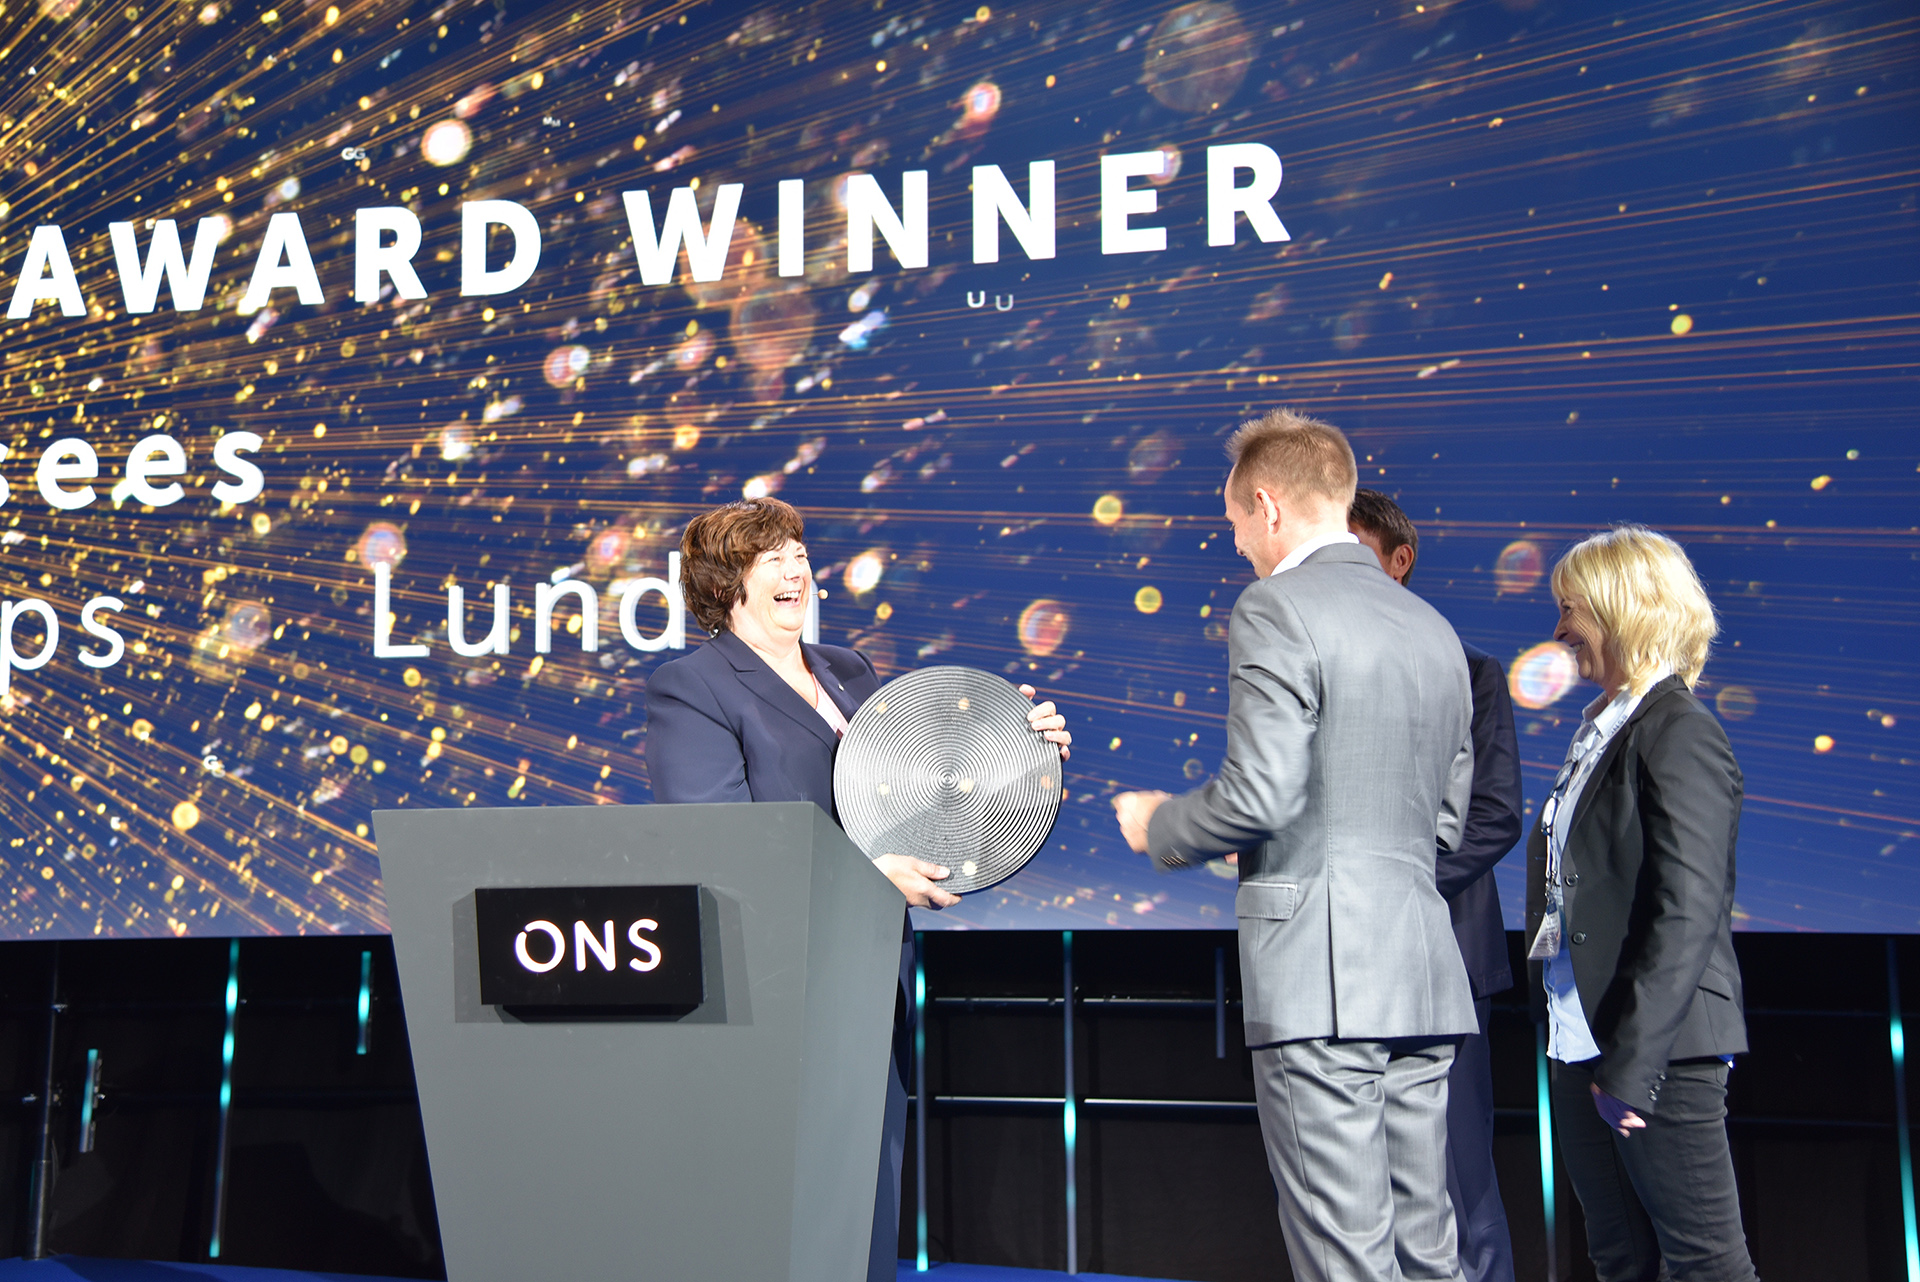 The award was presented for the 15th time by NPD director general Bente Nyland at an event during the ONS 2018 oil show in Stavanger on 28 August. Representatives from Aker BP (operator with a 65 per cent interest), ConocoPhillips (20 per cent) and Lundin (15 per cent) were called onto the stage to receive the prestigious prize.